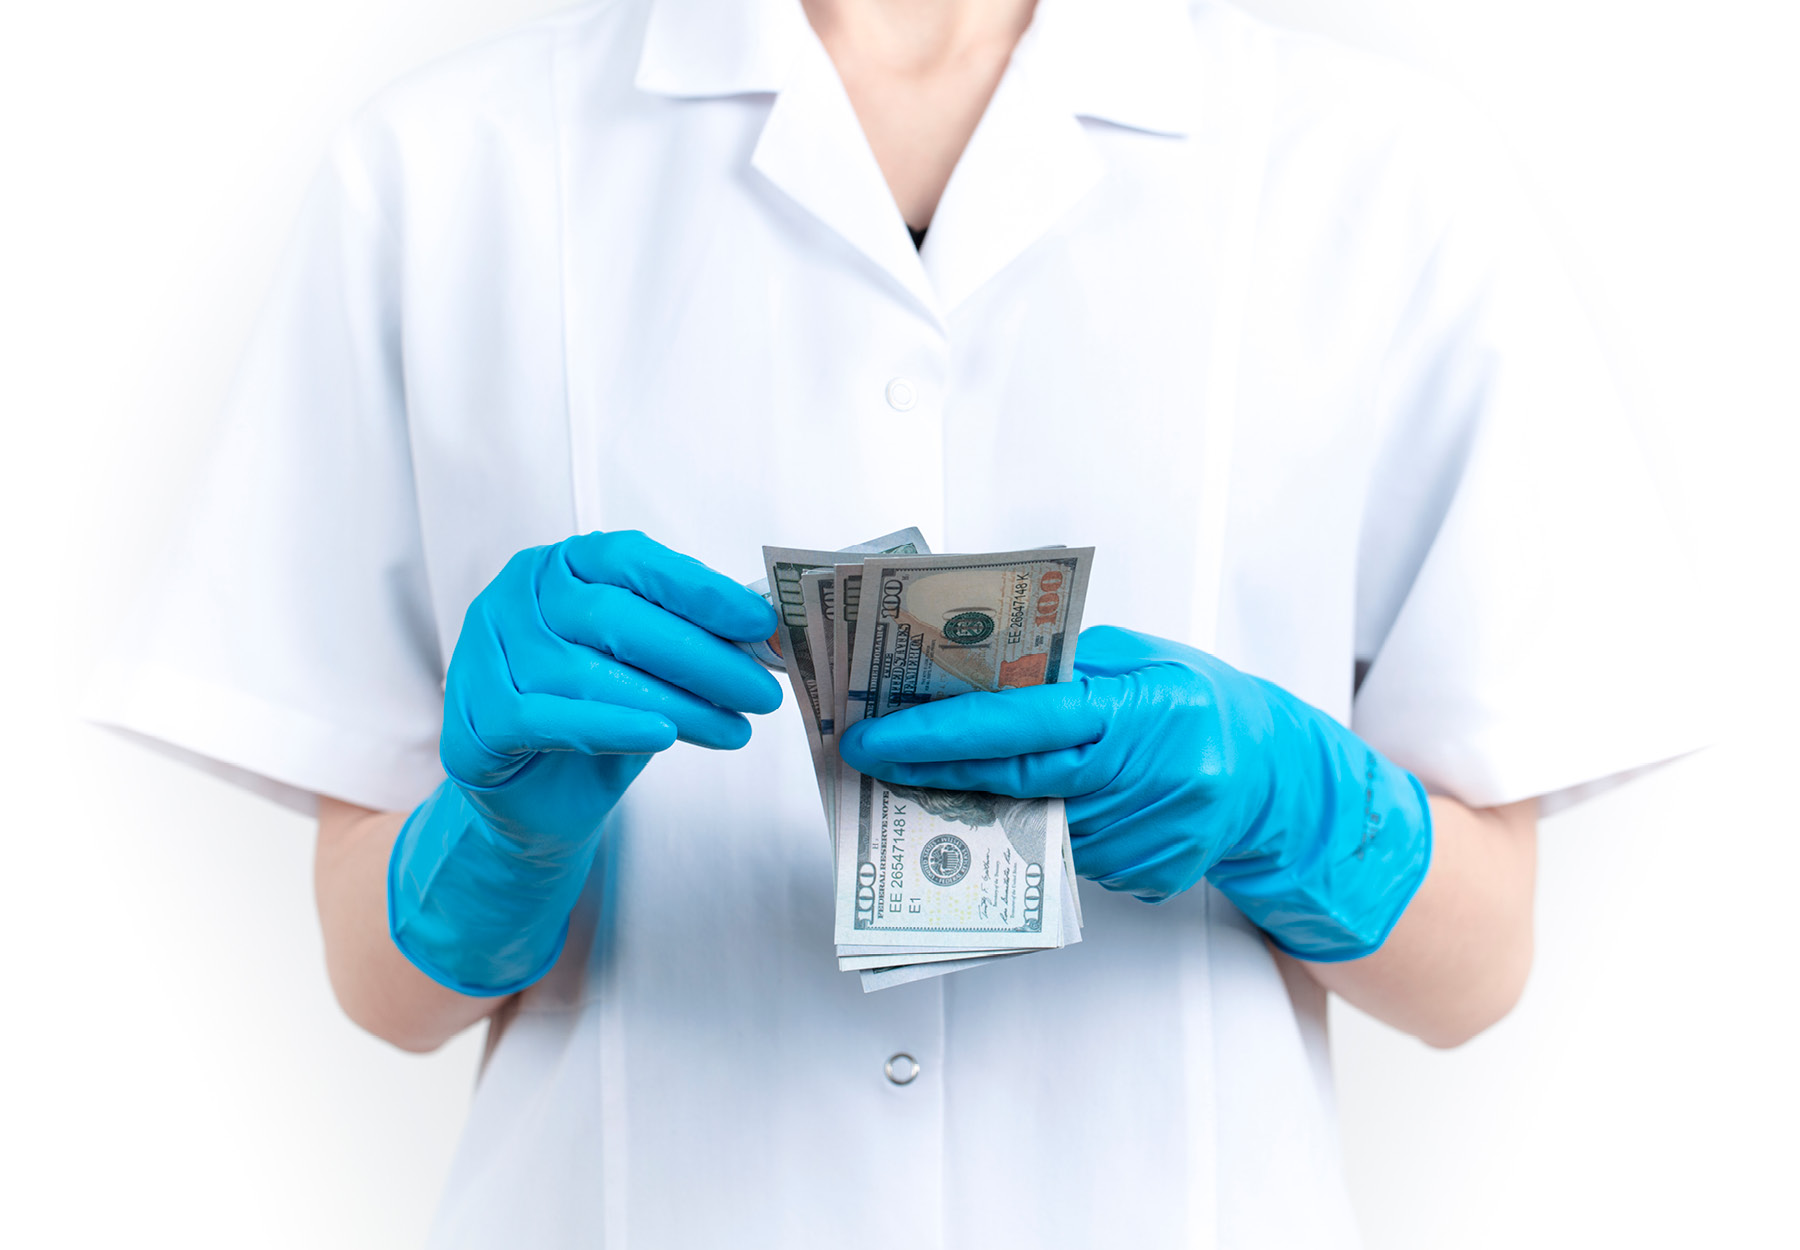 Hands of healthcare or lab worker counting US dollar bills. Healthcare fraud concept. iStock image.